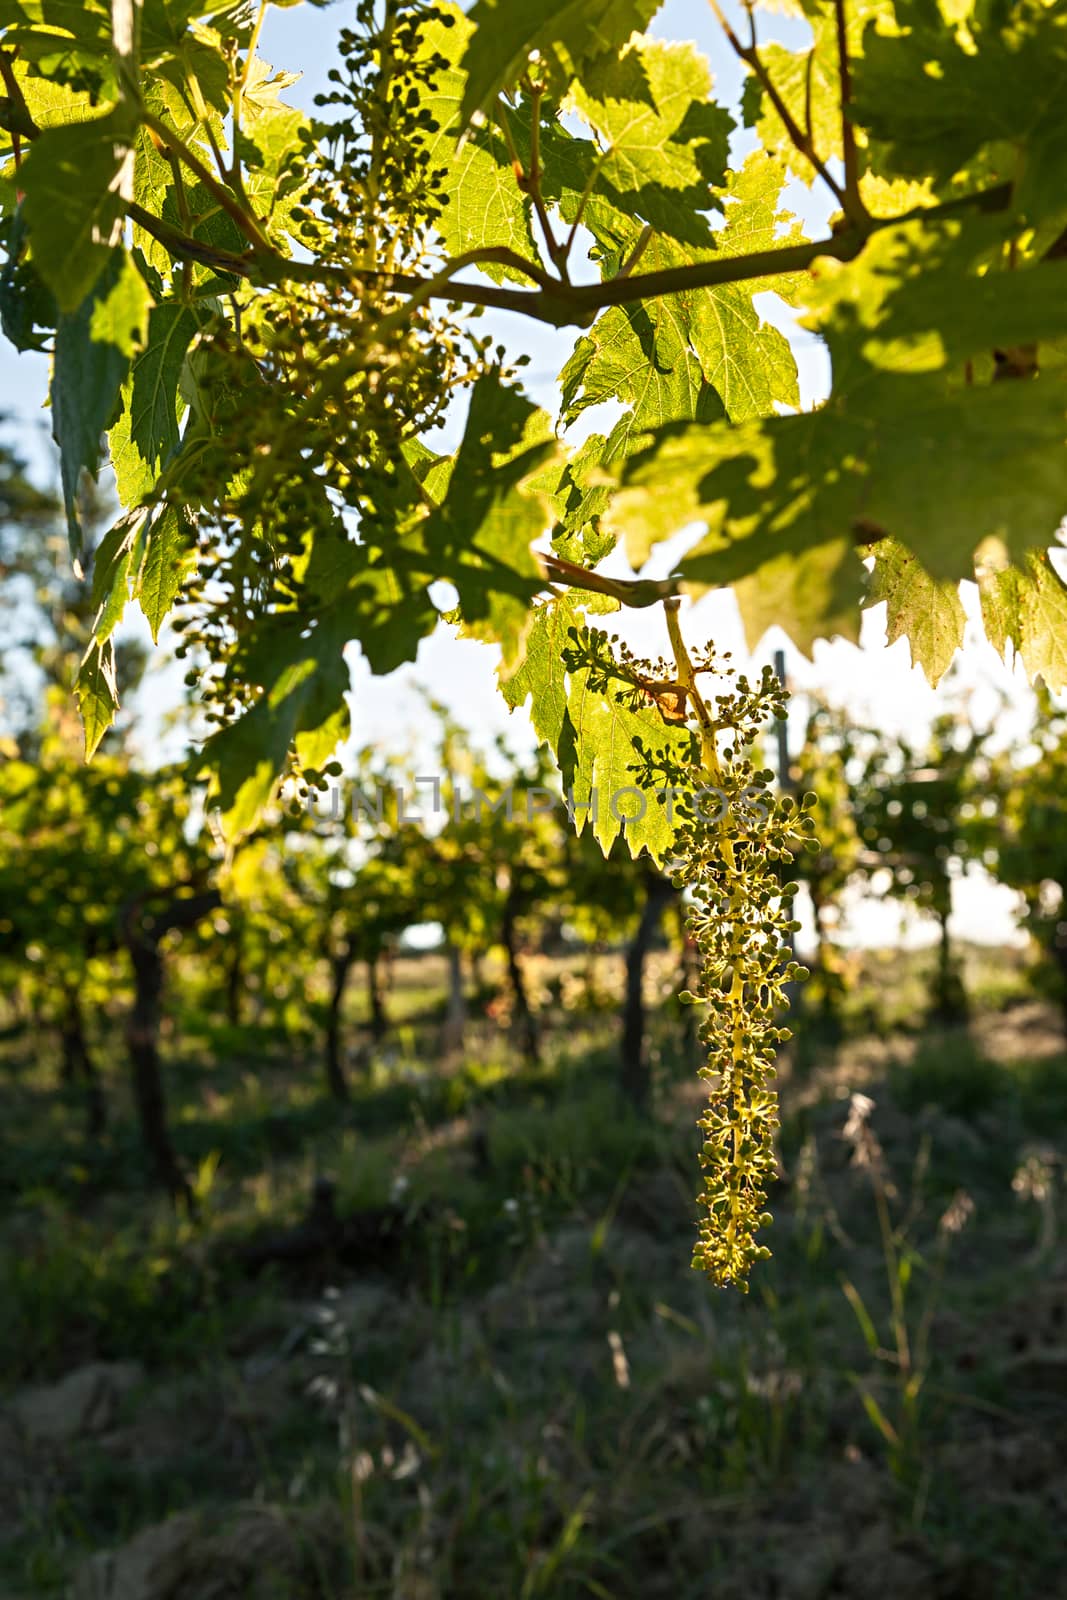 Small green grapes on vineyard in backlight